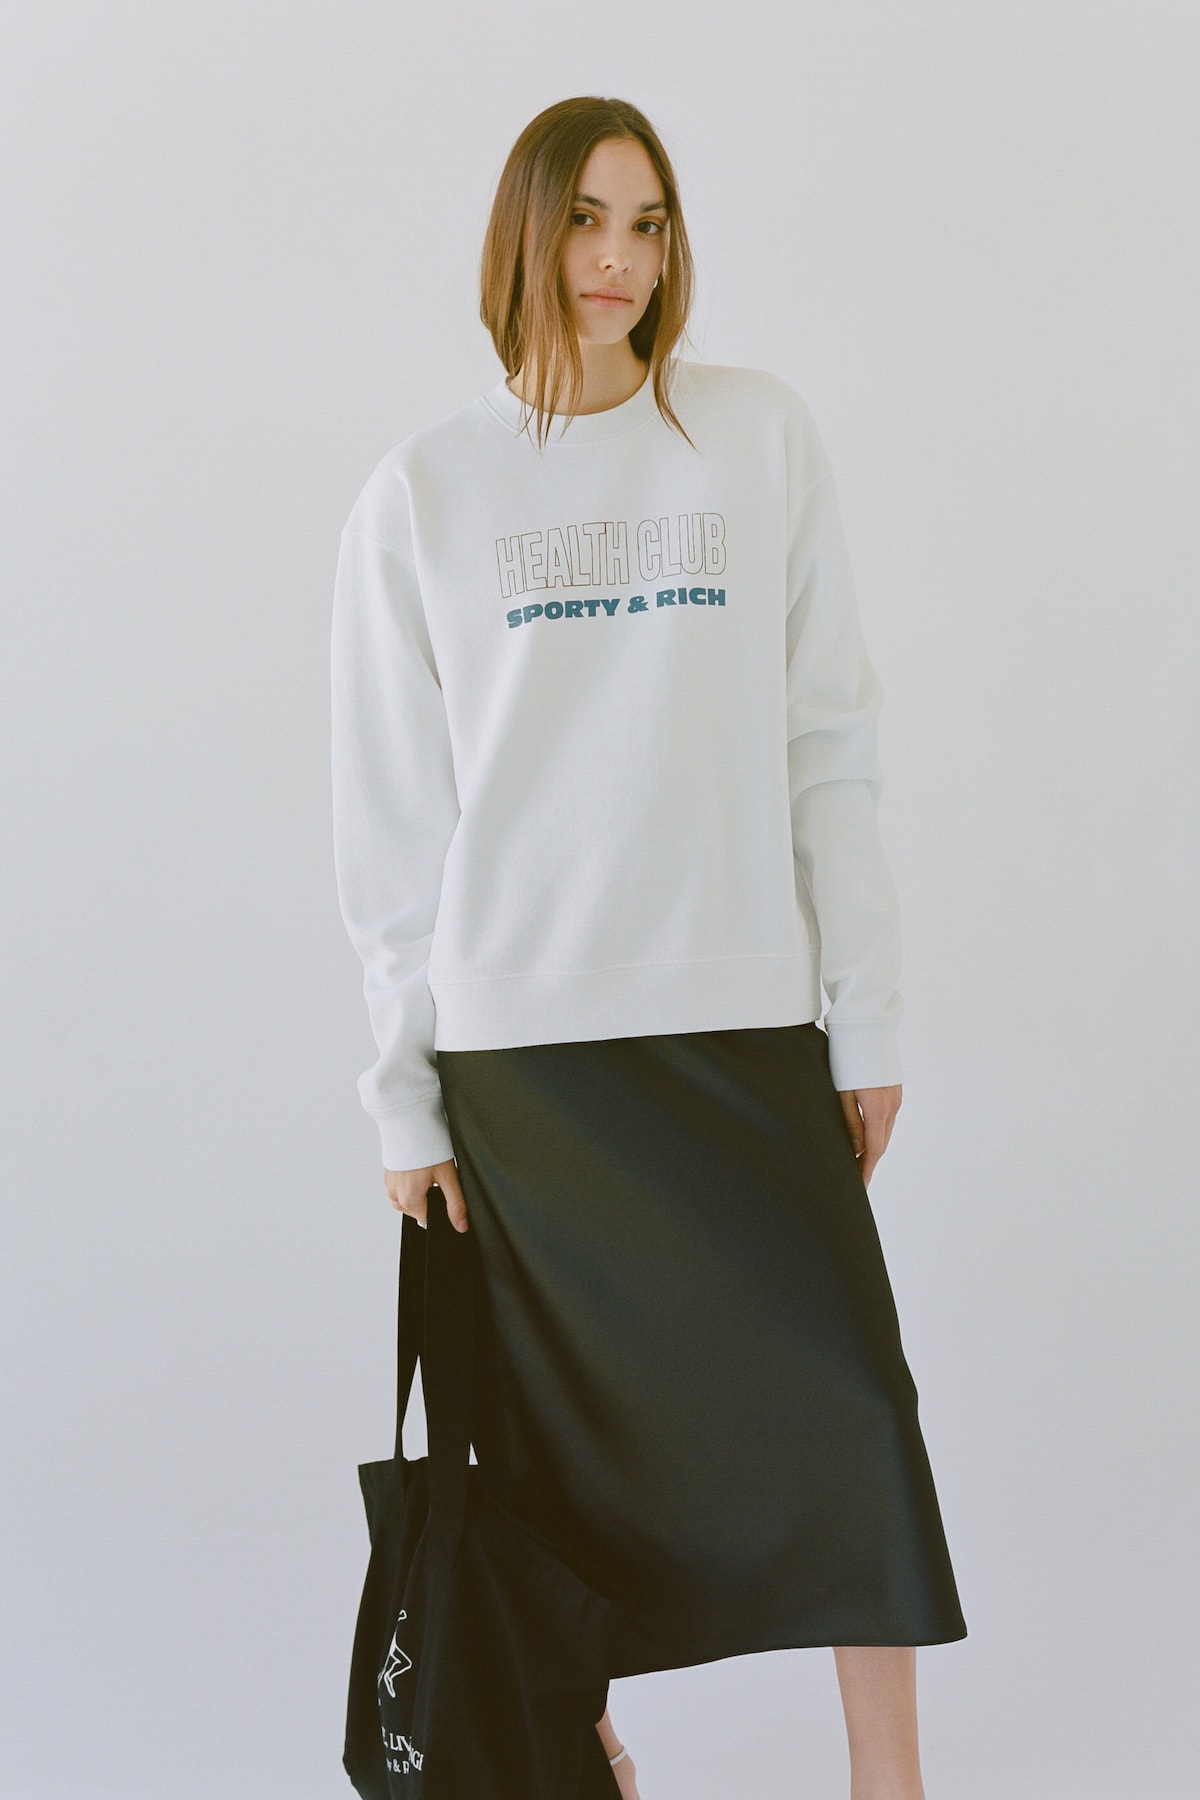 Sporty & Rich Emily Oberg Spring 2020 Collection Campaign Sweatshirt Logo T-Shirt 